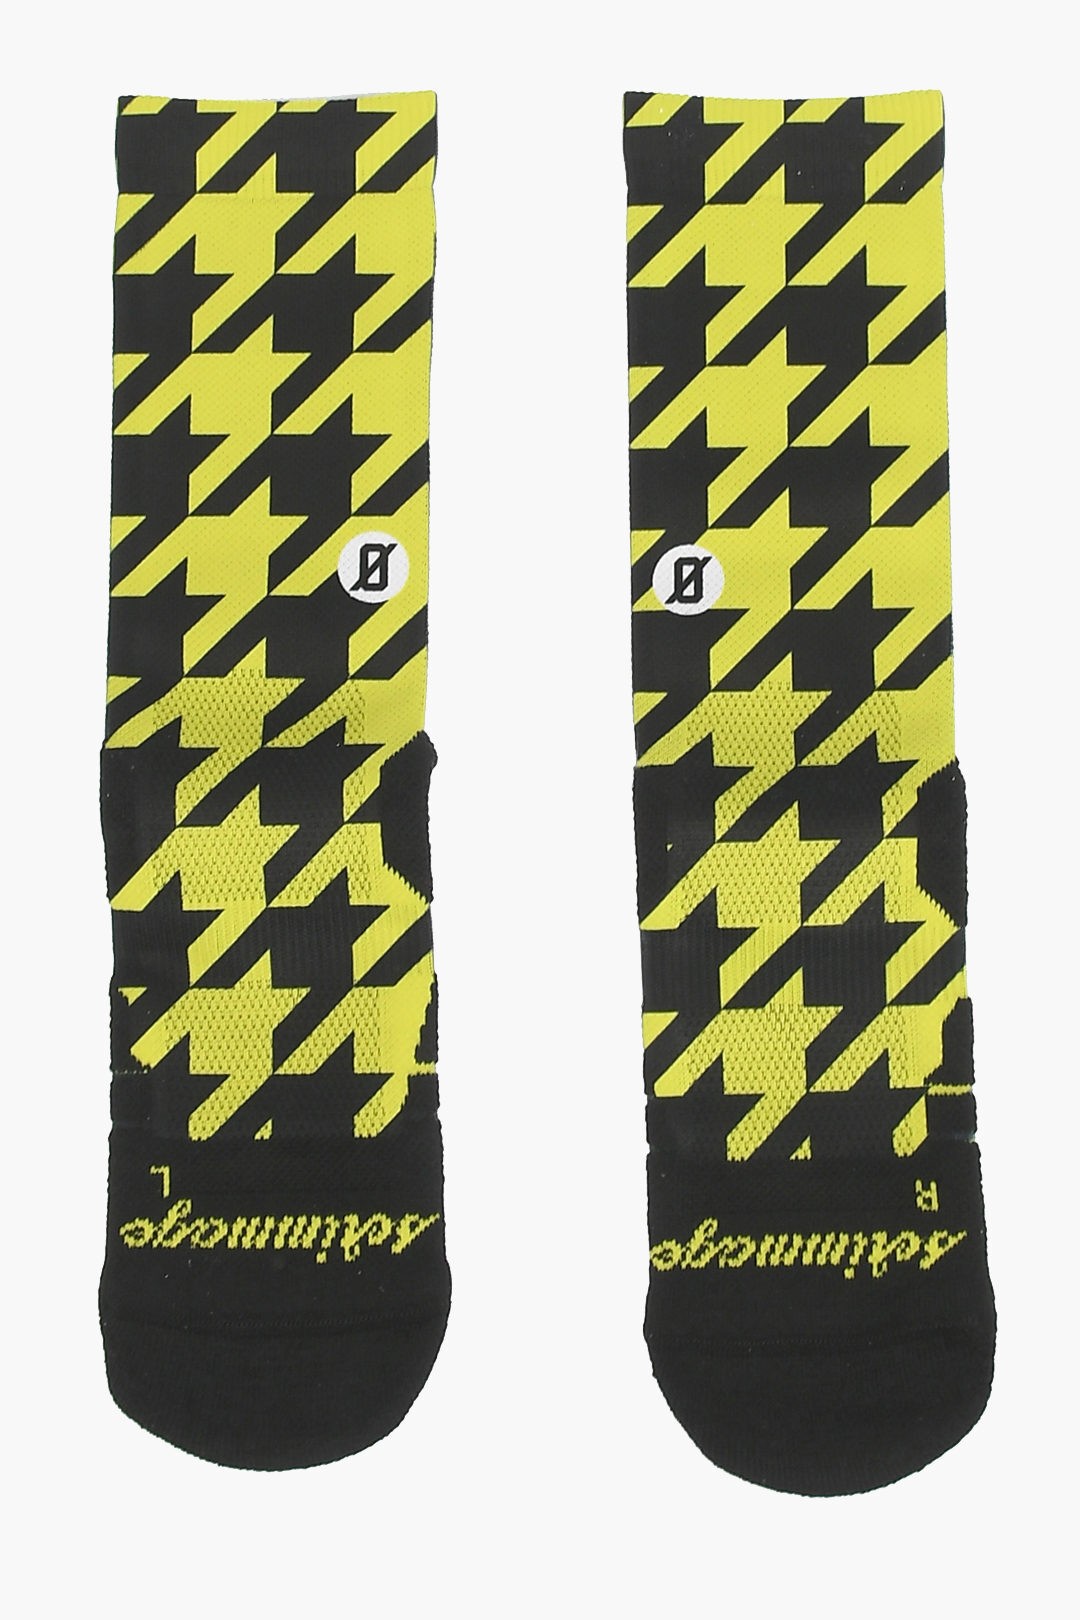 TOOT 【6h限定！2000円OFFクーポン配布中】 SCRIMMAGE スクリメージ アンダーウェア PIED POULE YELLOW メンズ HOUNDSTOOTH PATTERNED TWO-TONE SOCKS 【関税・送料無料】【ラッピング無料】 dk